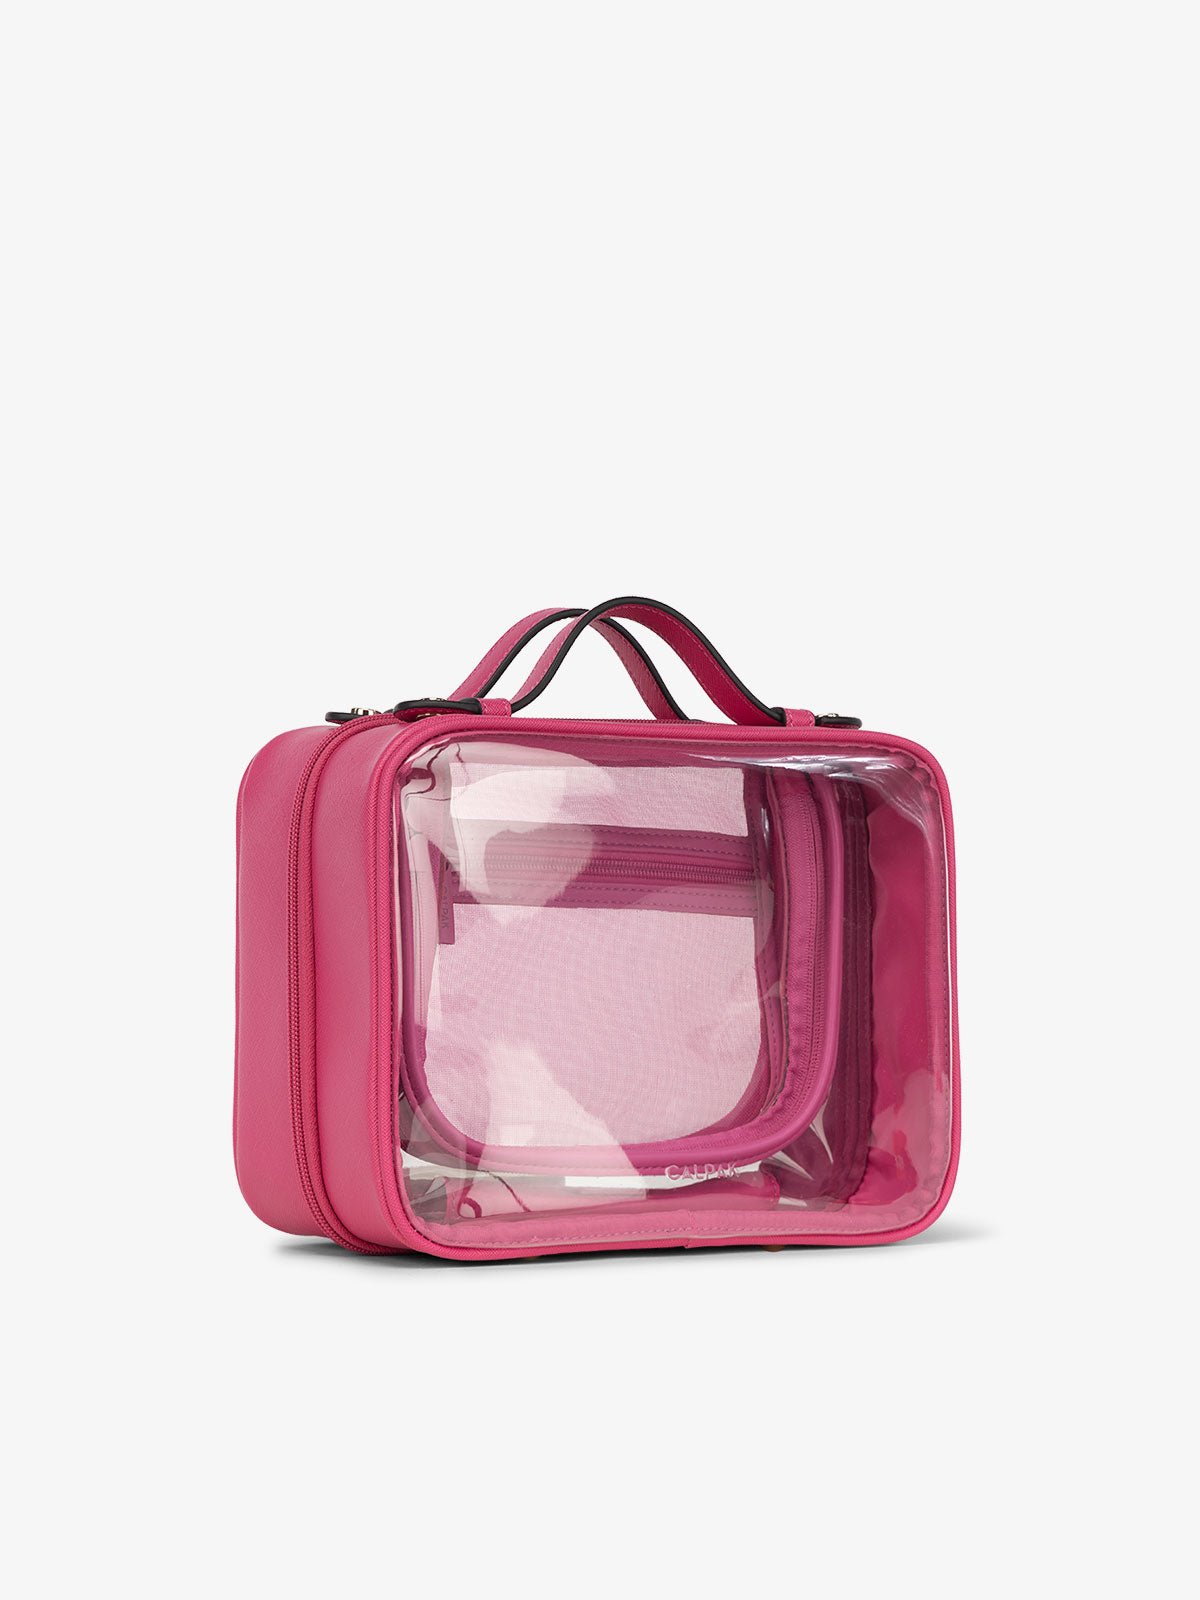 CALPAK medium clear cosmetics case with sturdy handles in pink